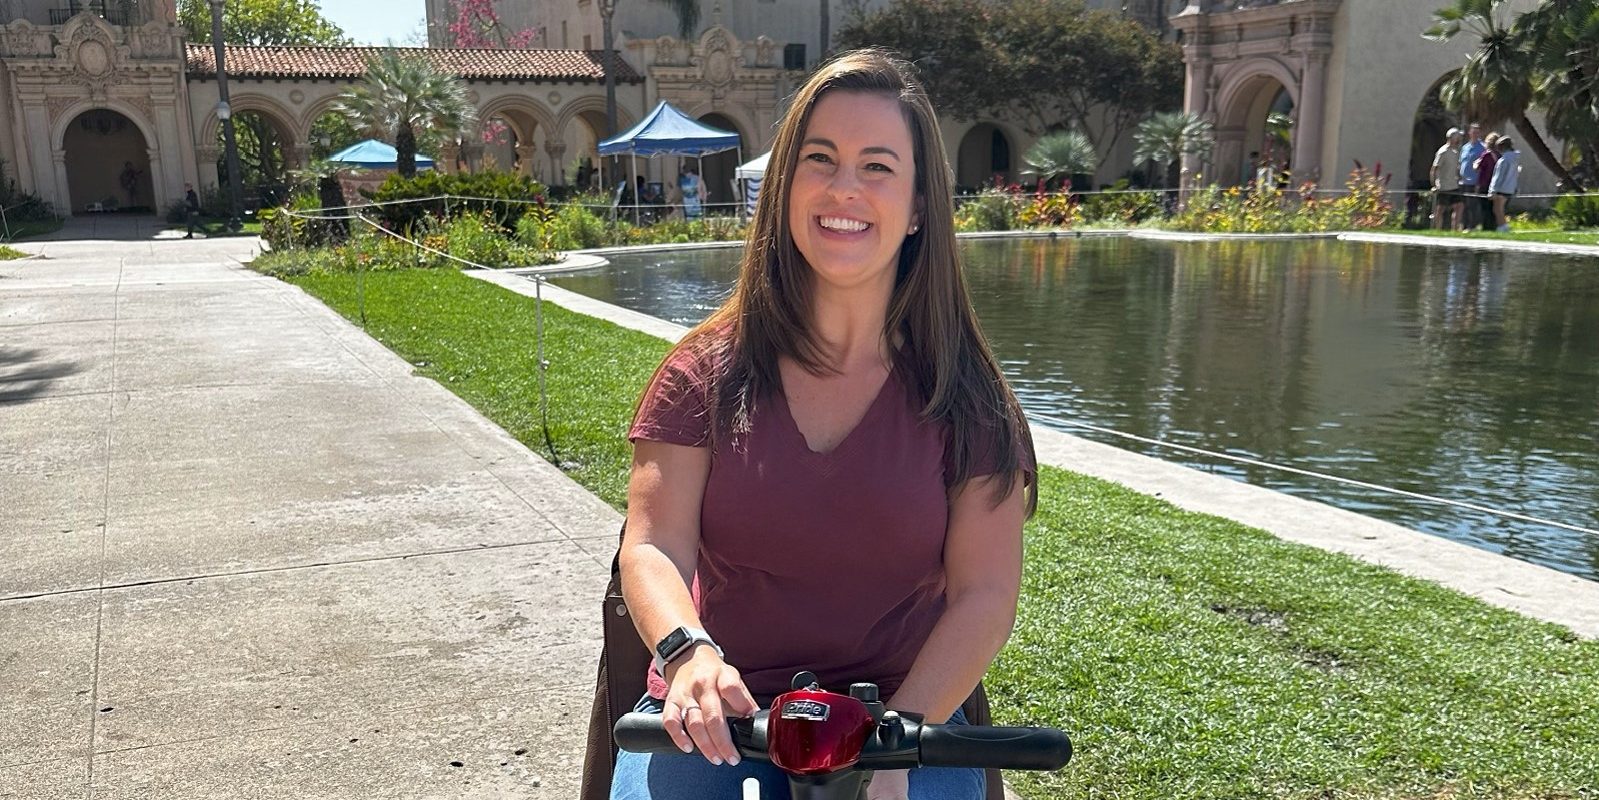 San Diego’s accessibility shines in a tour by mobility scooter